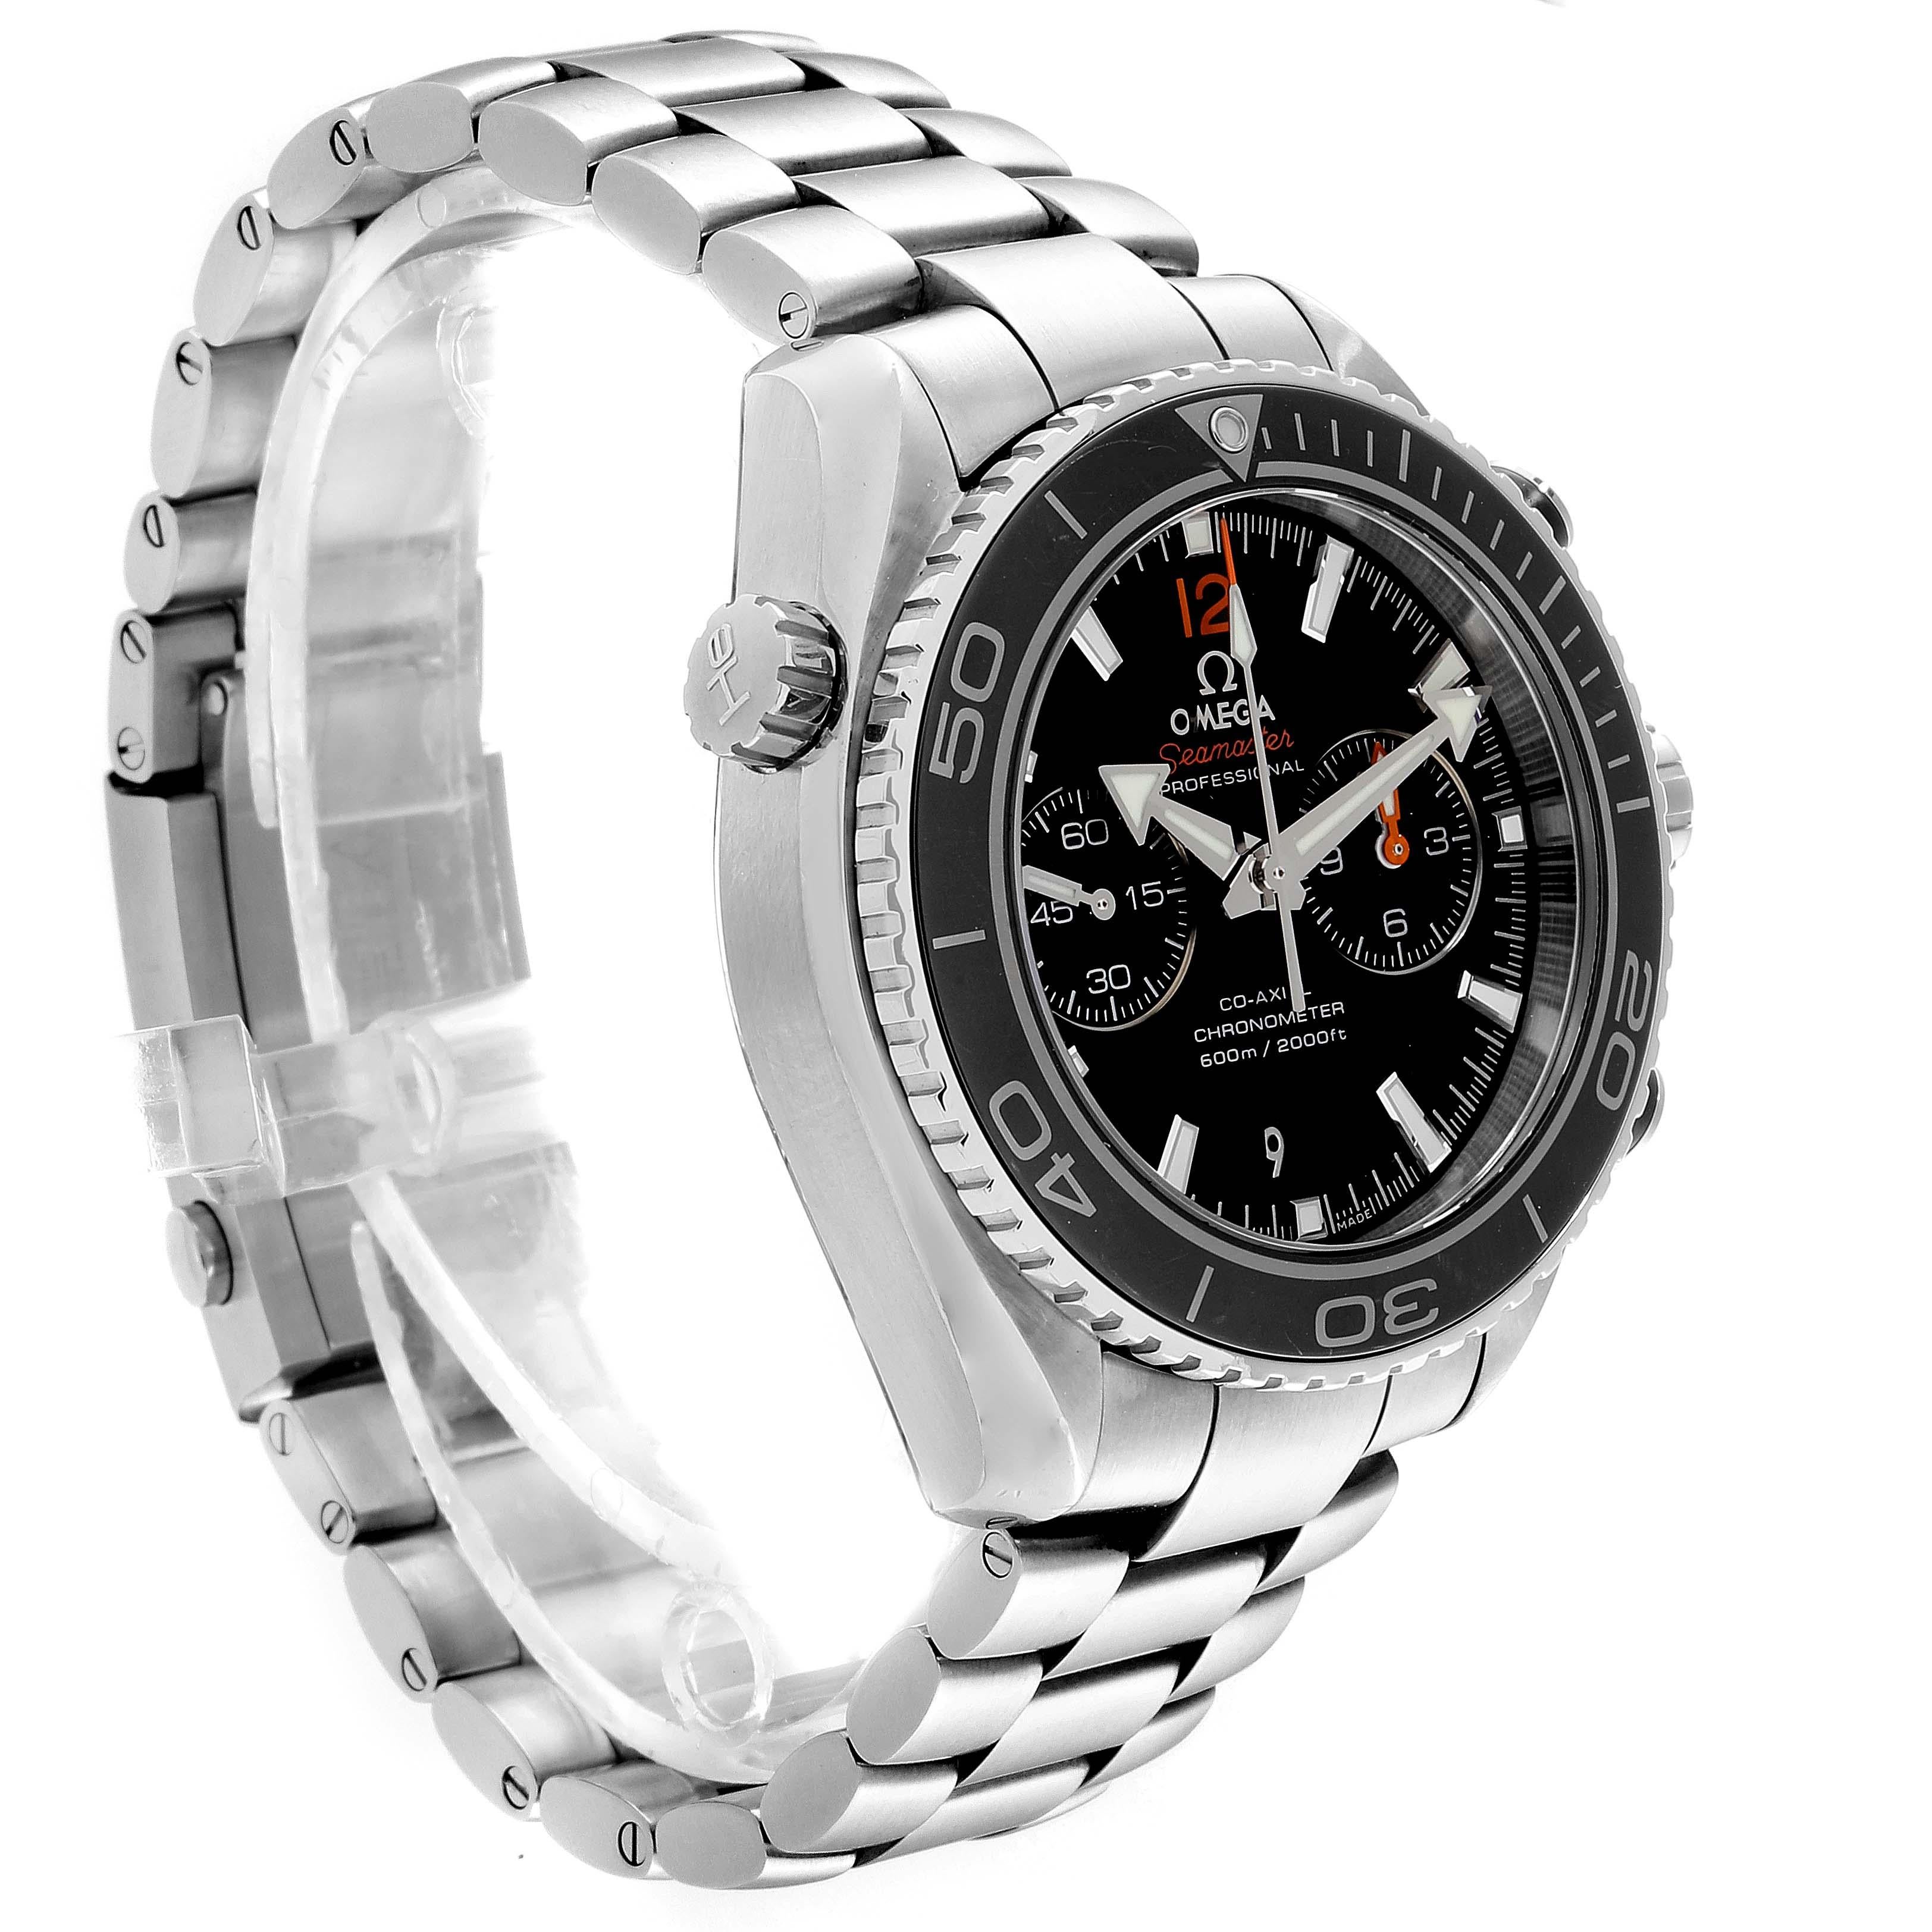 Omega Seamaster Planet Ocean Men's Watch 232.30.46.51.01.003 Box Card For Sale 1